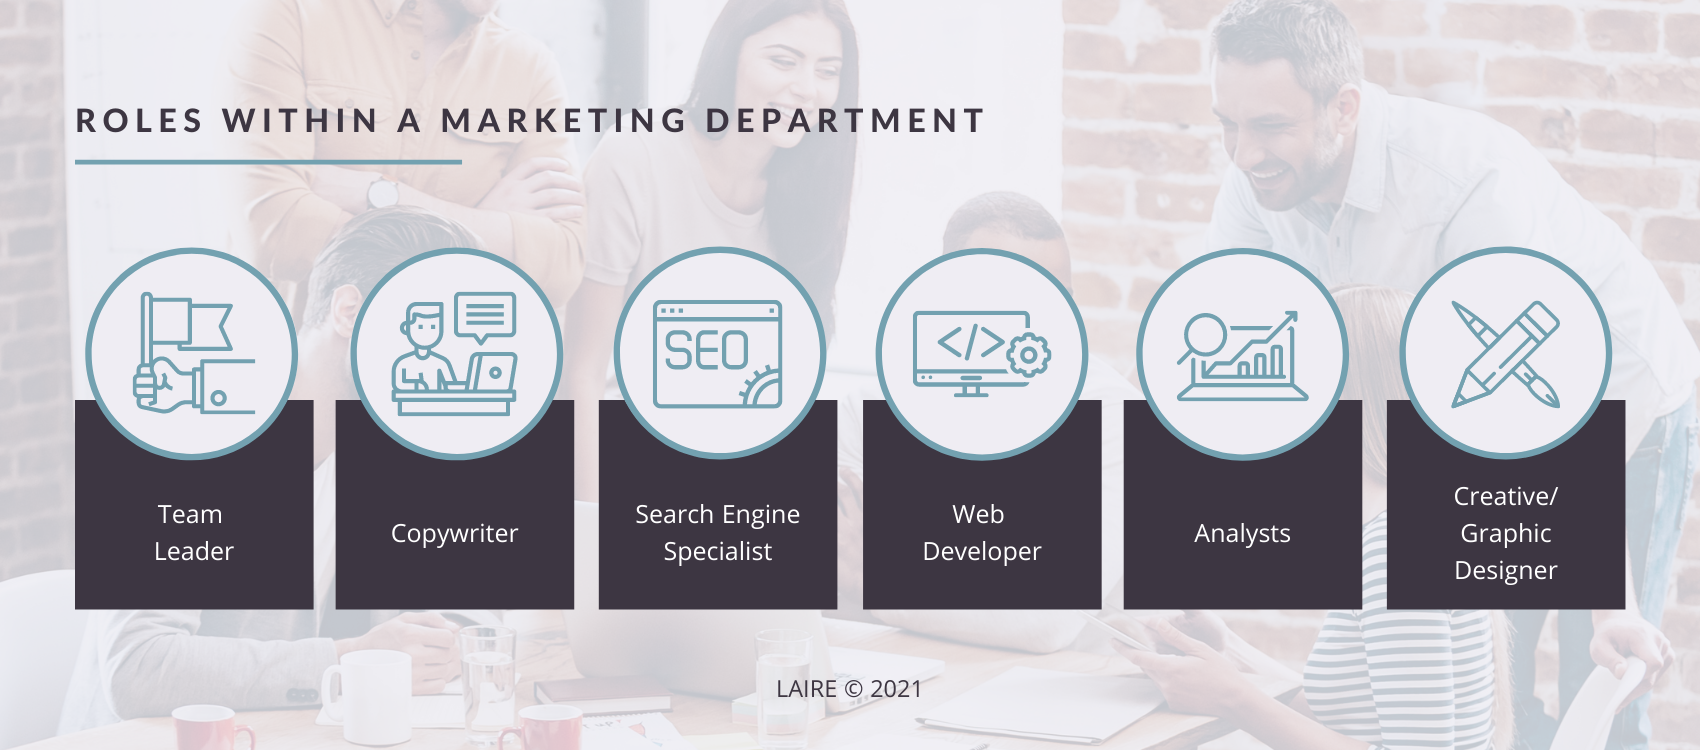 LAIRE - Roles Within a Marketing Department